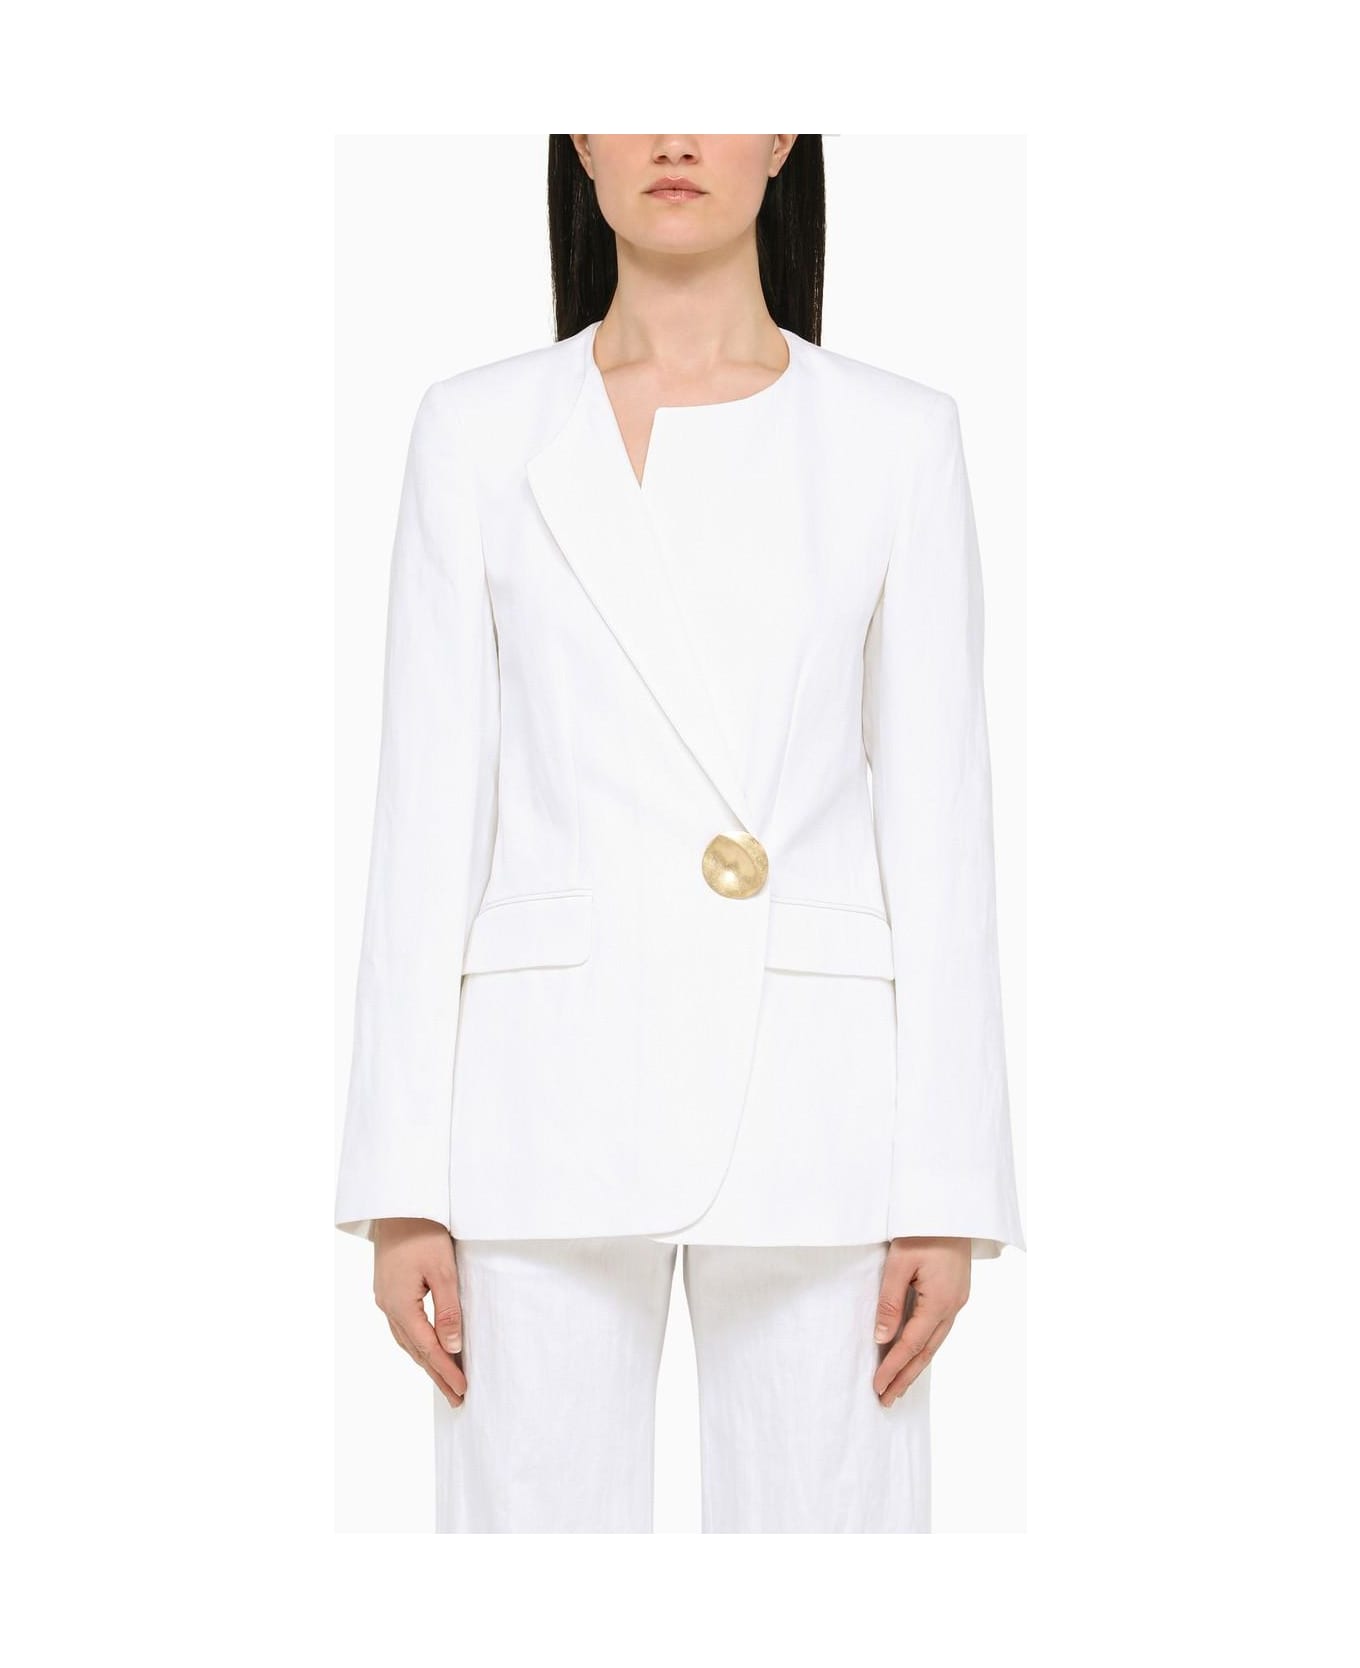 Dries Van Noten White Double-breasted Jacket